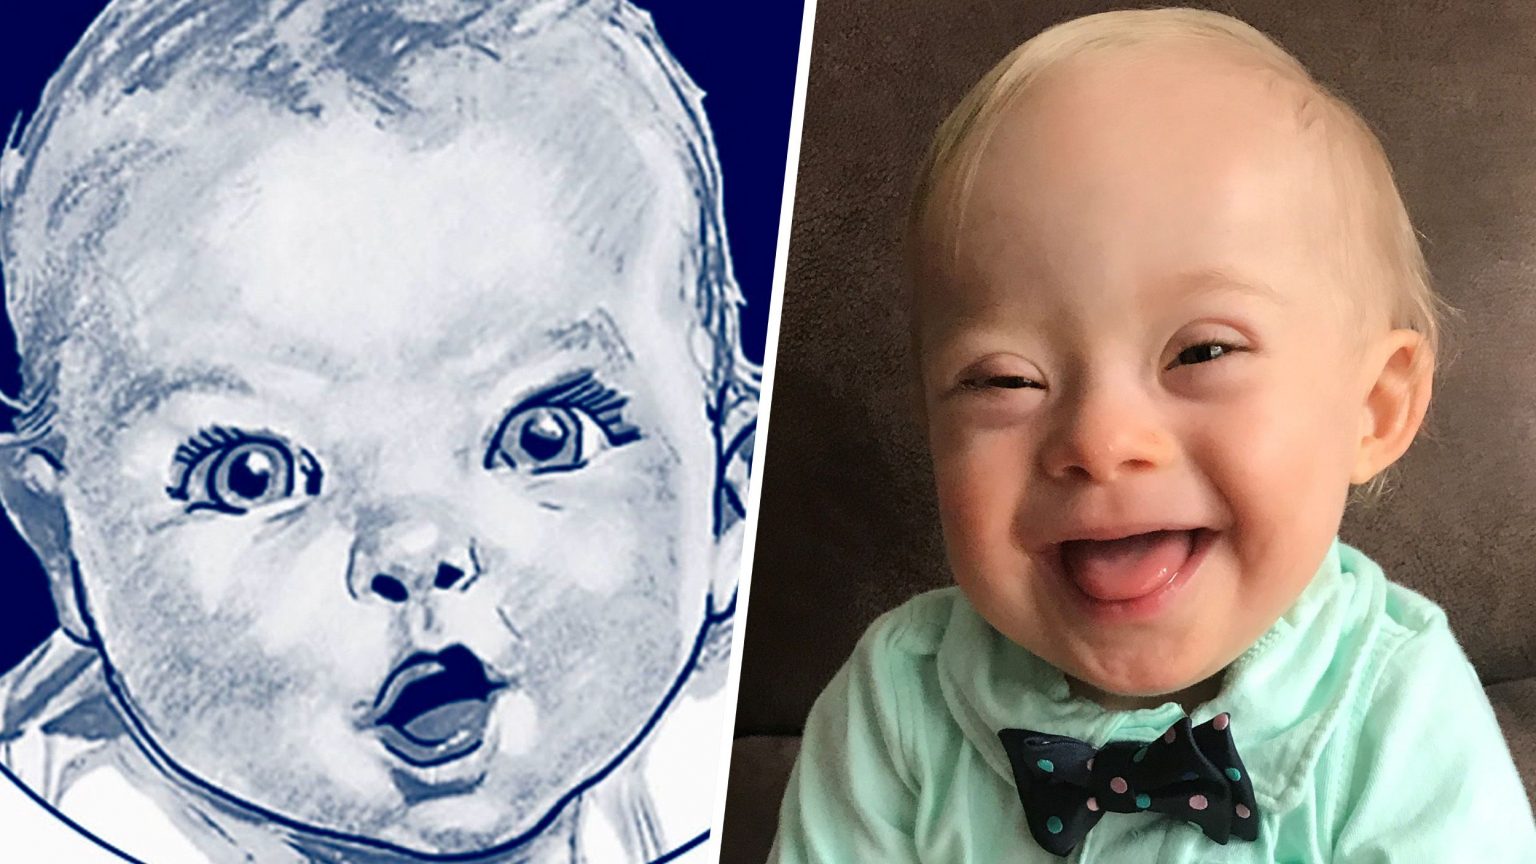 The First Adopted Baby Is Chosen For The 2020 Gerber Baby Campaign